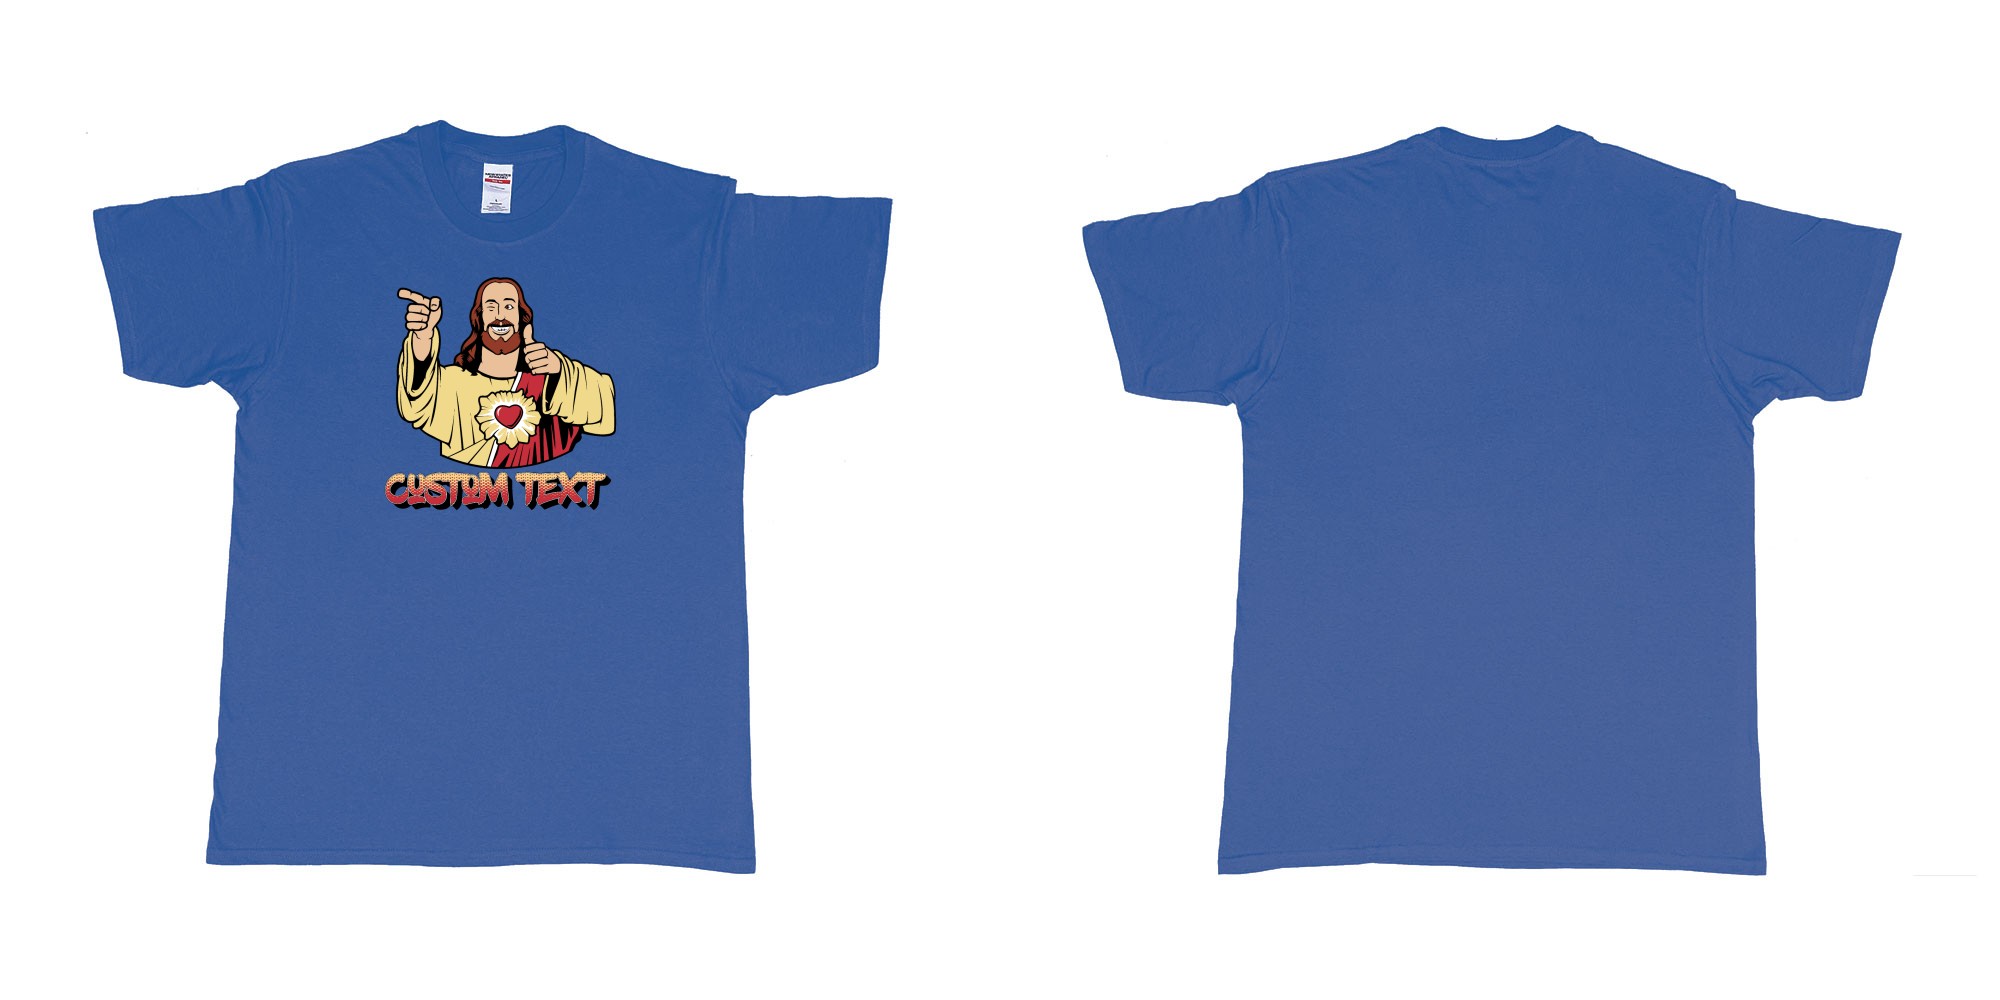 Custom tshirt design buddy christ custom text in fabric color royal-blue choice your own text made in Bali by The Pirate Way